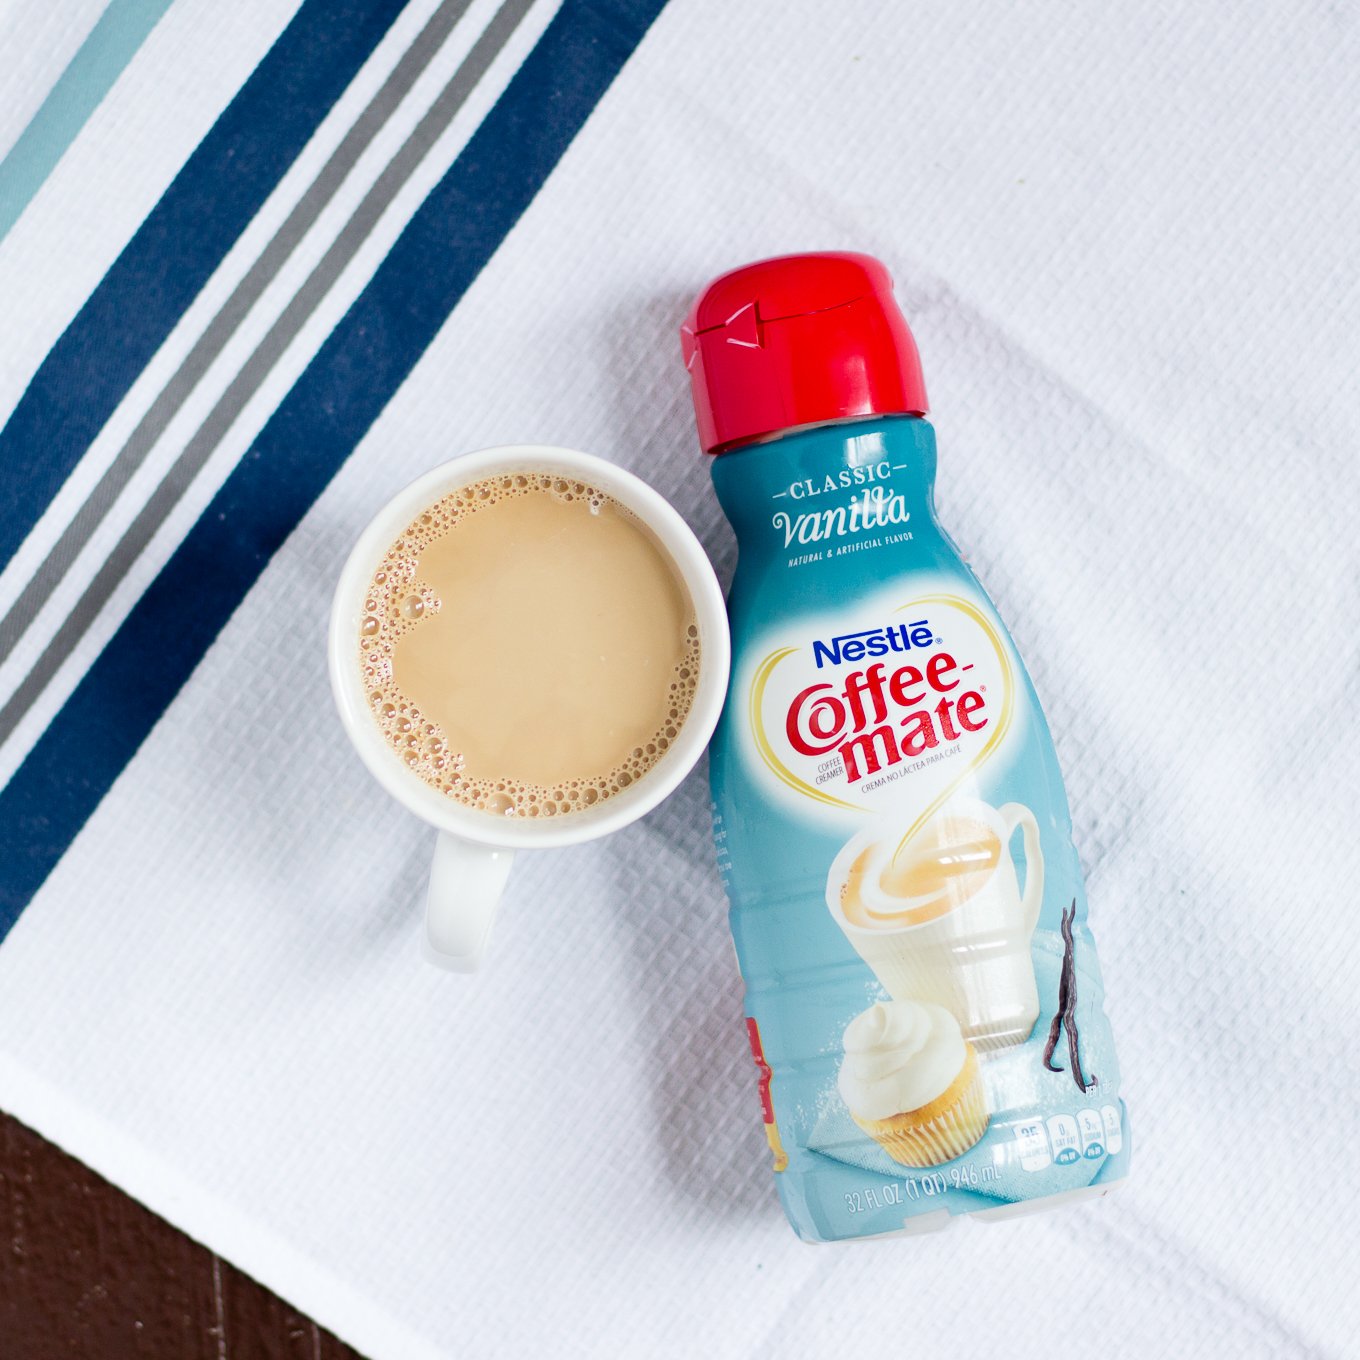 coffee-mate, #tbt, throwback thursday, coffee memories